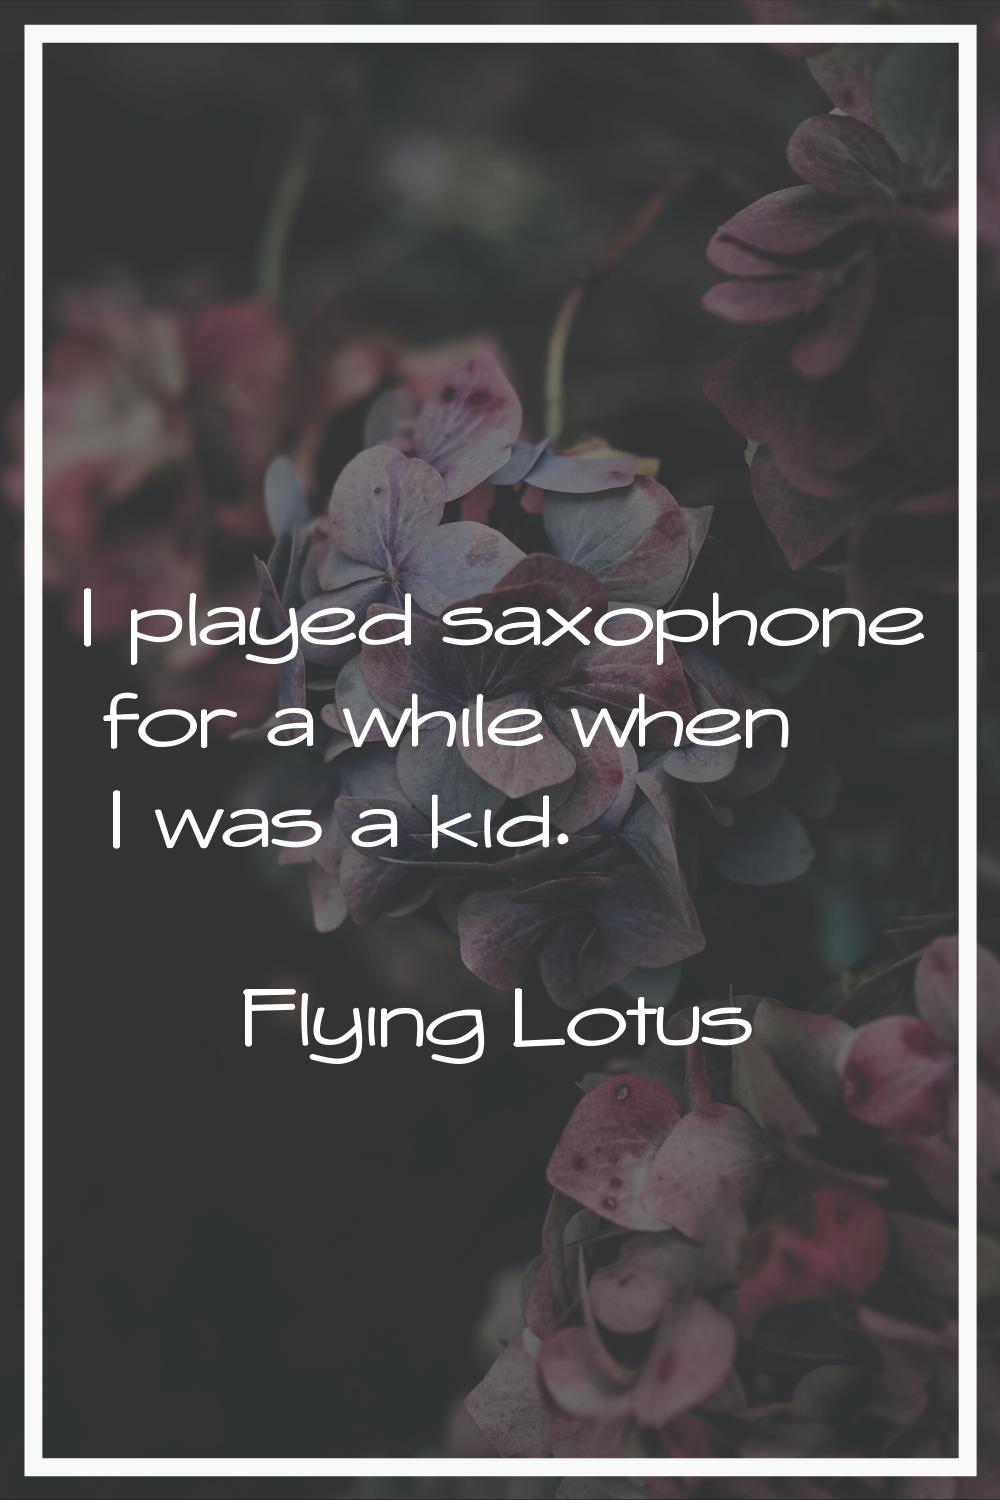 I played saxophone for a while when I was a kid.